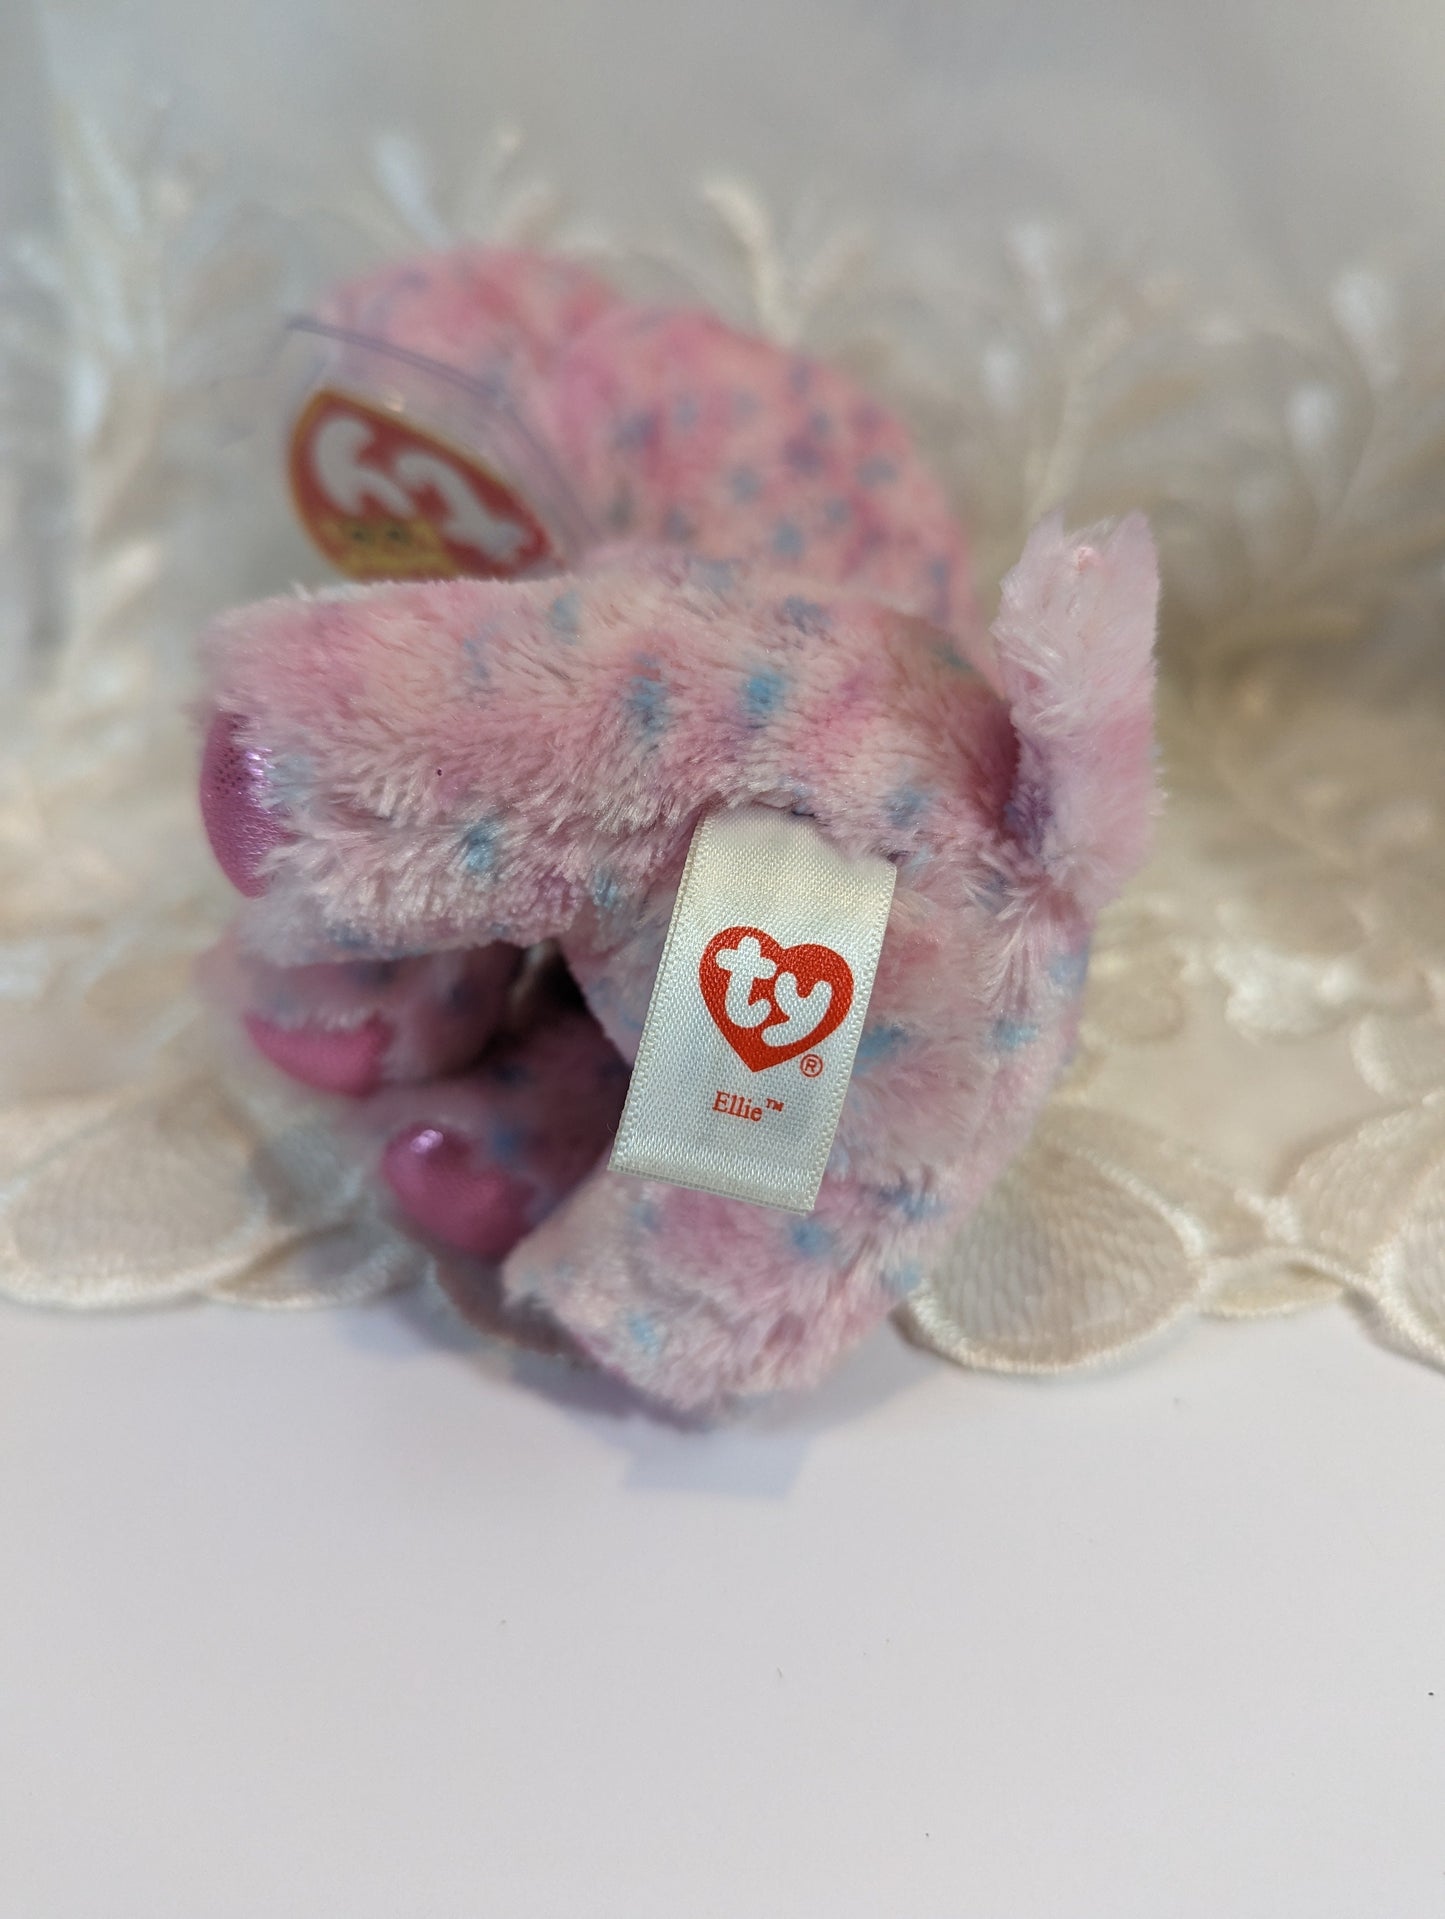 Ty Beanie Boo - Ellie The Pink Elephant (6in) Scuffed Eyes, Non-mint Tag - Vintage Beanies Canada